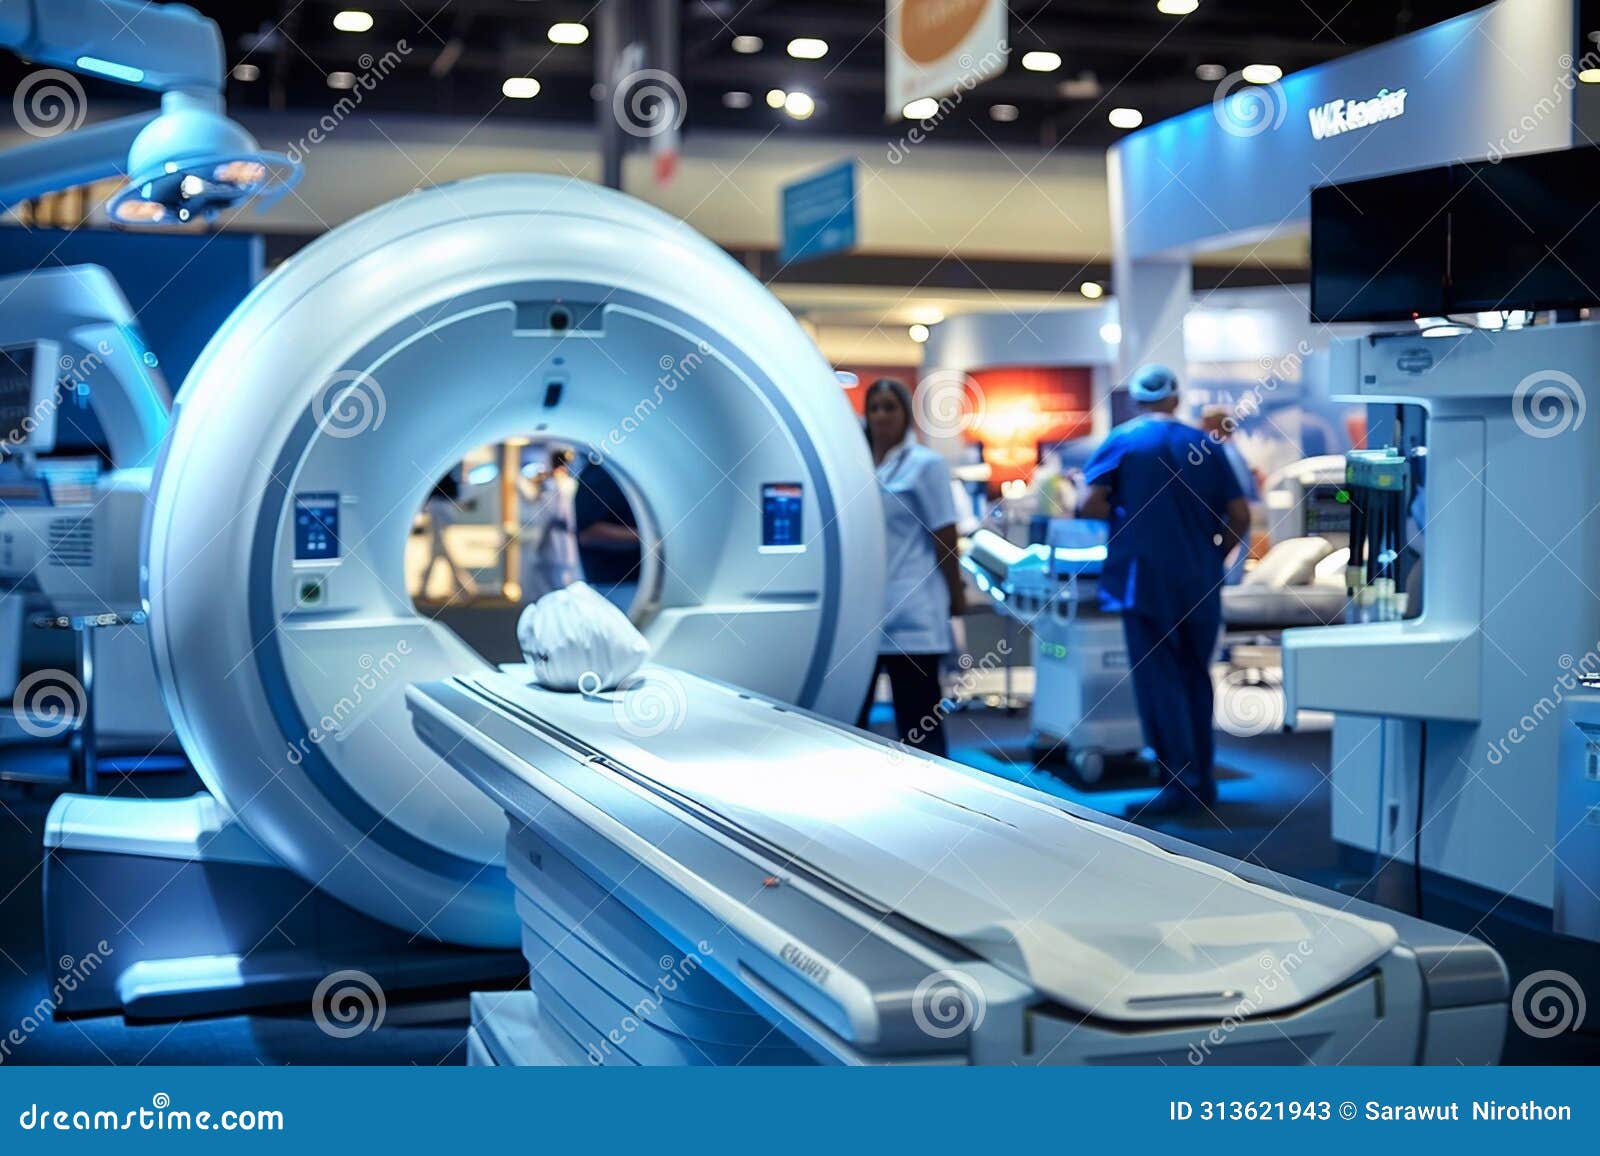 medical technology, showcase cutting-edge medical equipment, mri, machines, robotic surgical systems